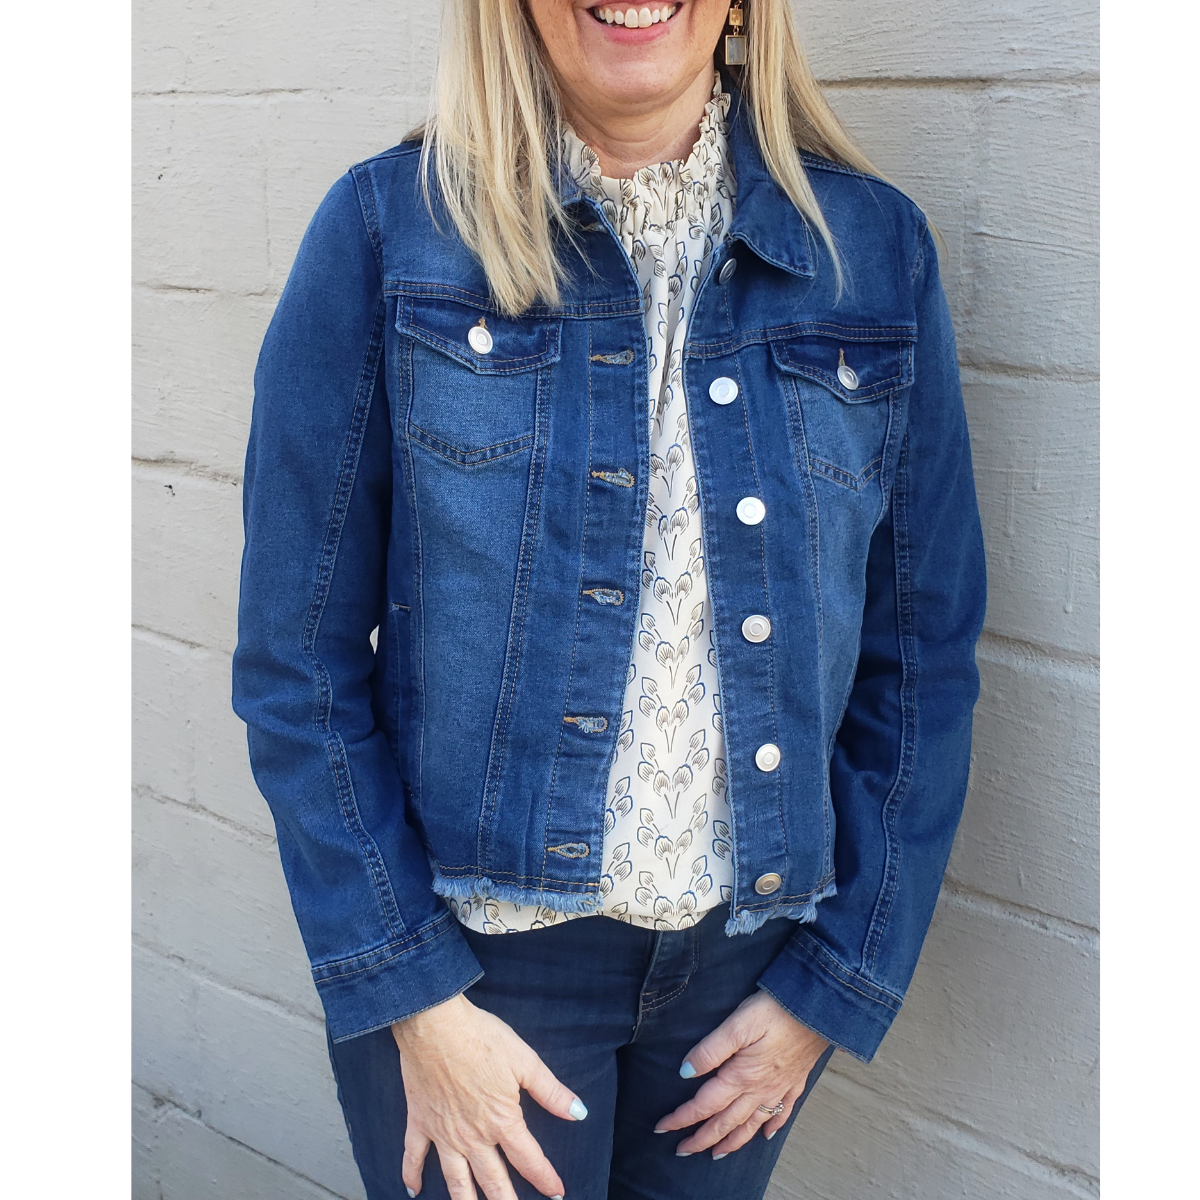 A woman wearing a Ronnie Salloway & Co Inc Denim Jacket with Frayed Hem and jeans.